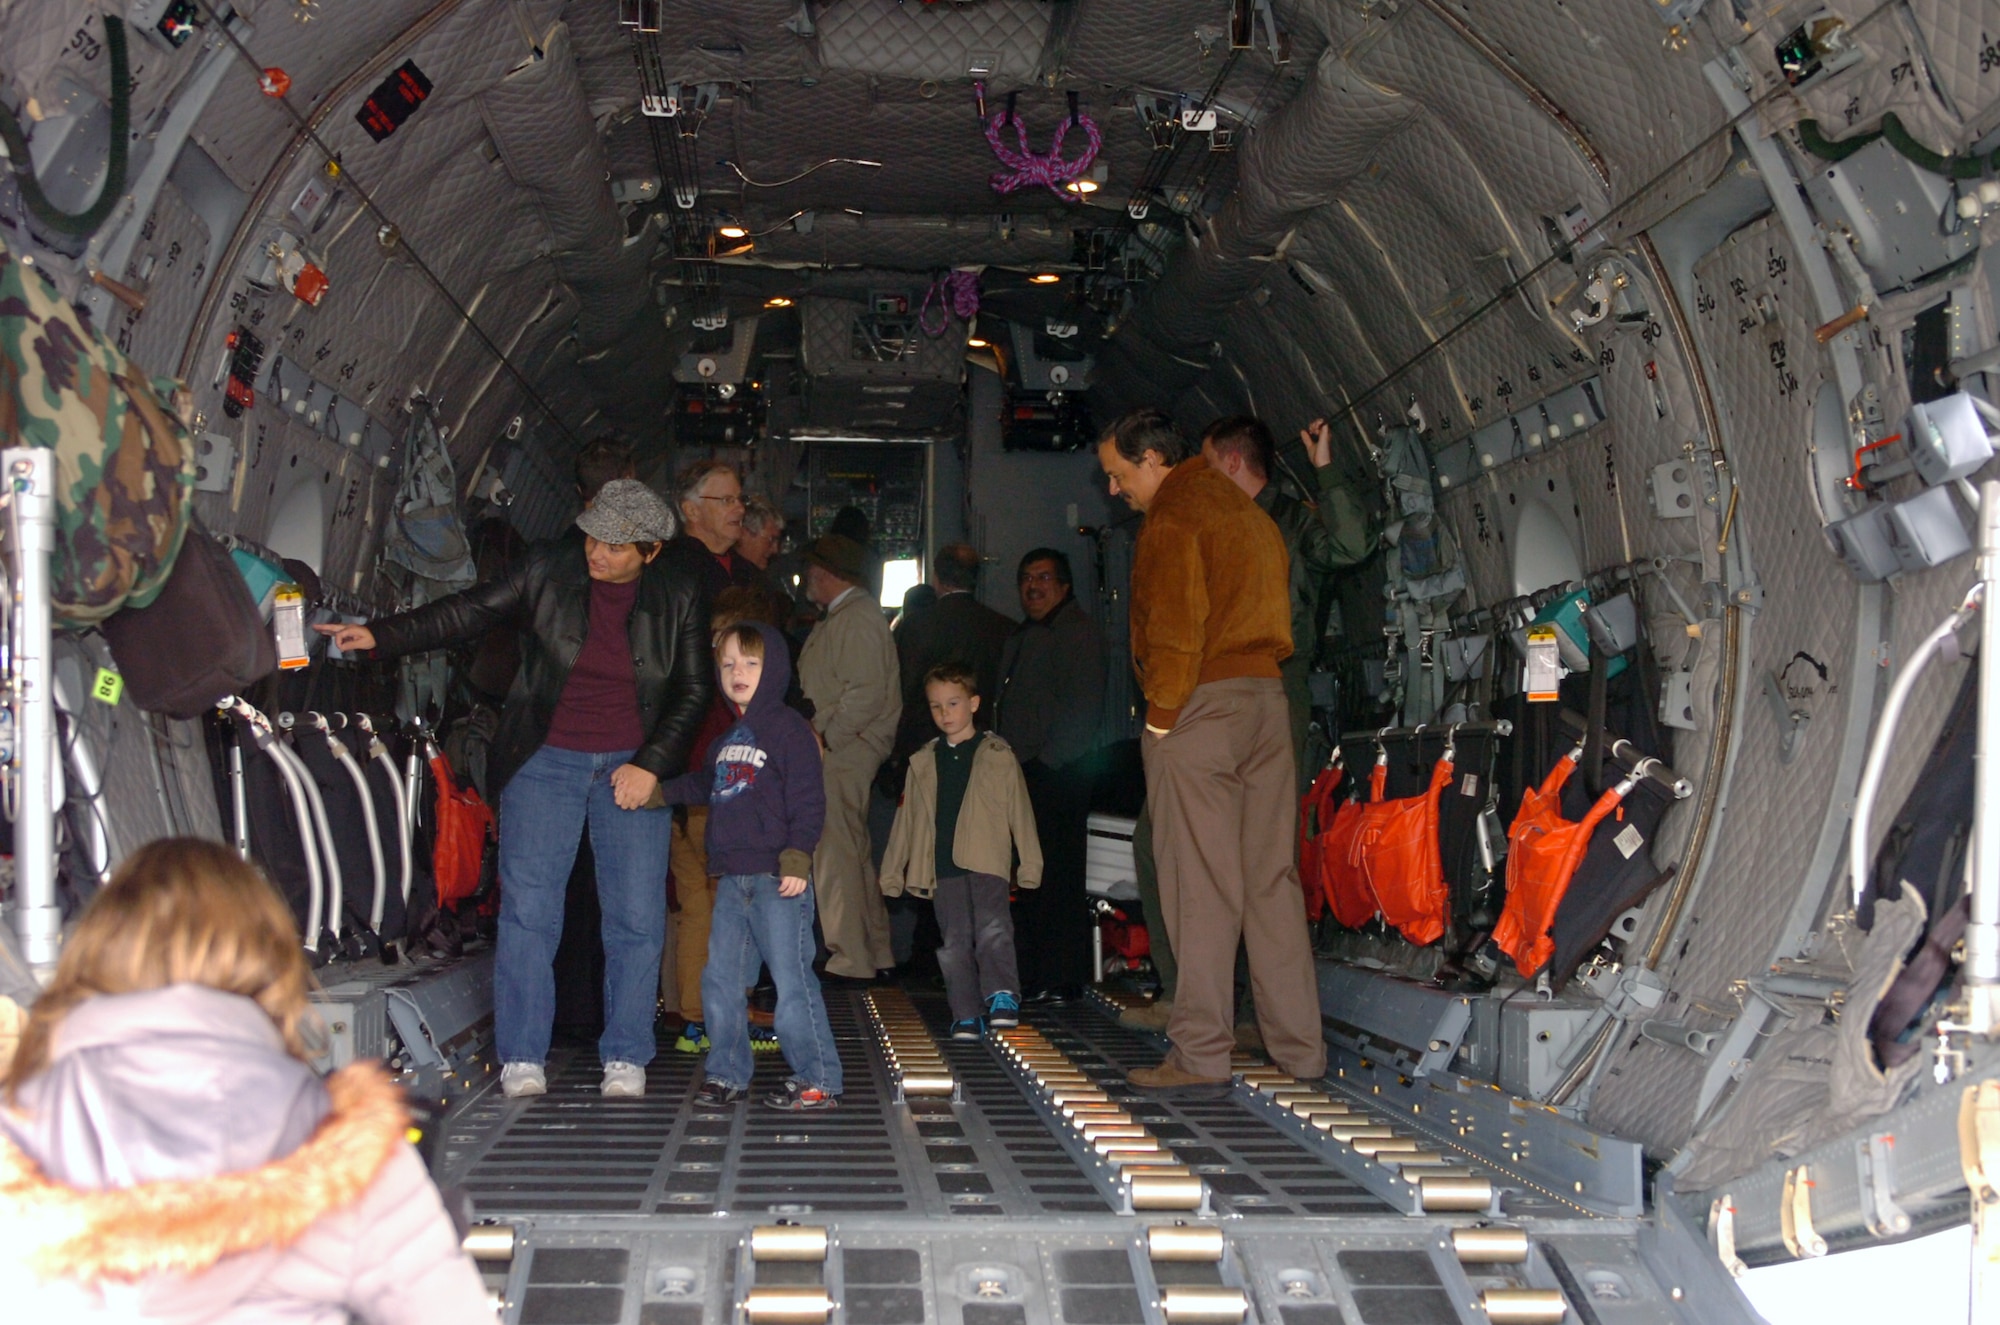 The Maryland Air National Guard coordinated with the Wicomico Regional Airport to allow media, local community members and airport personnel to tour the C-27J and have the opportunity to ask the flight crew questions about the aircraft. (National Guard Photo by 2nd Lt. Jessica Donnelly/RELEASED)